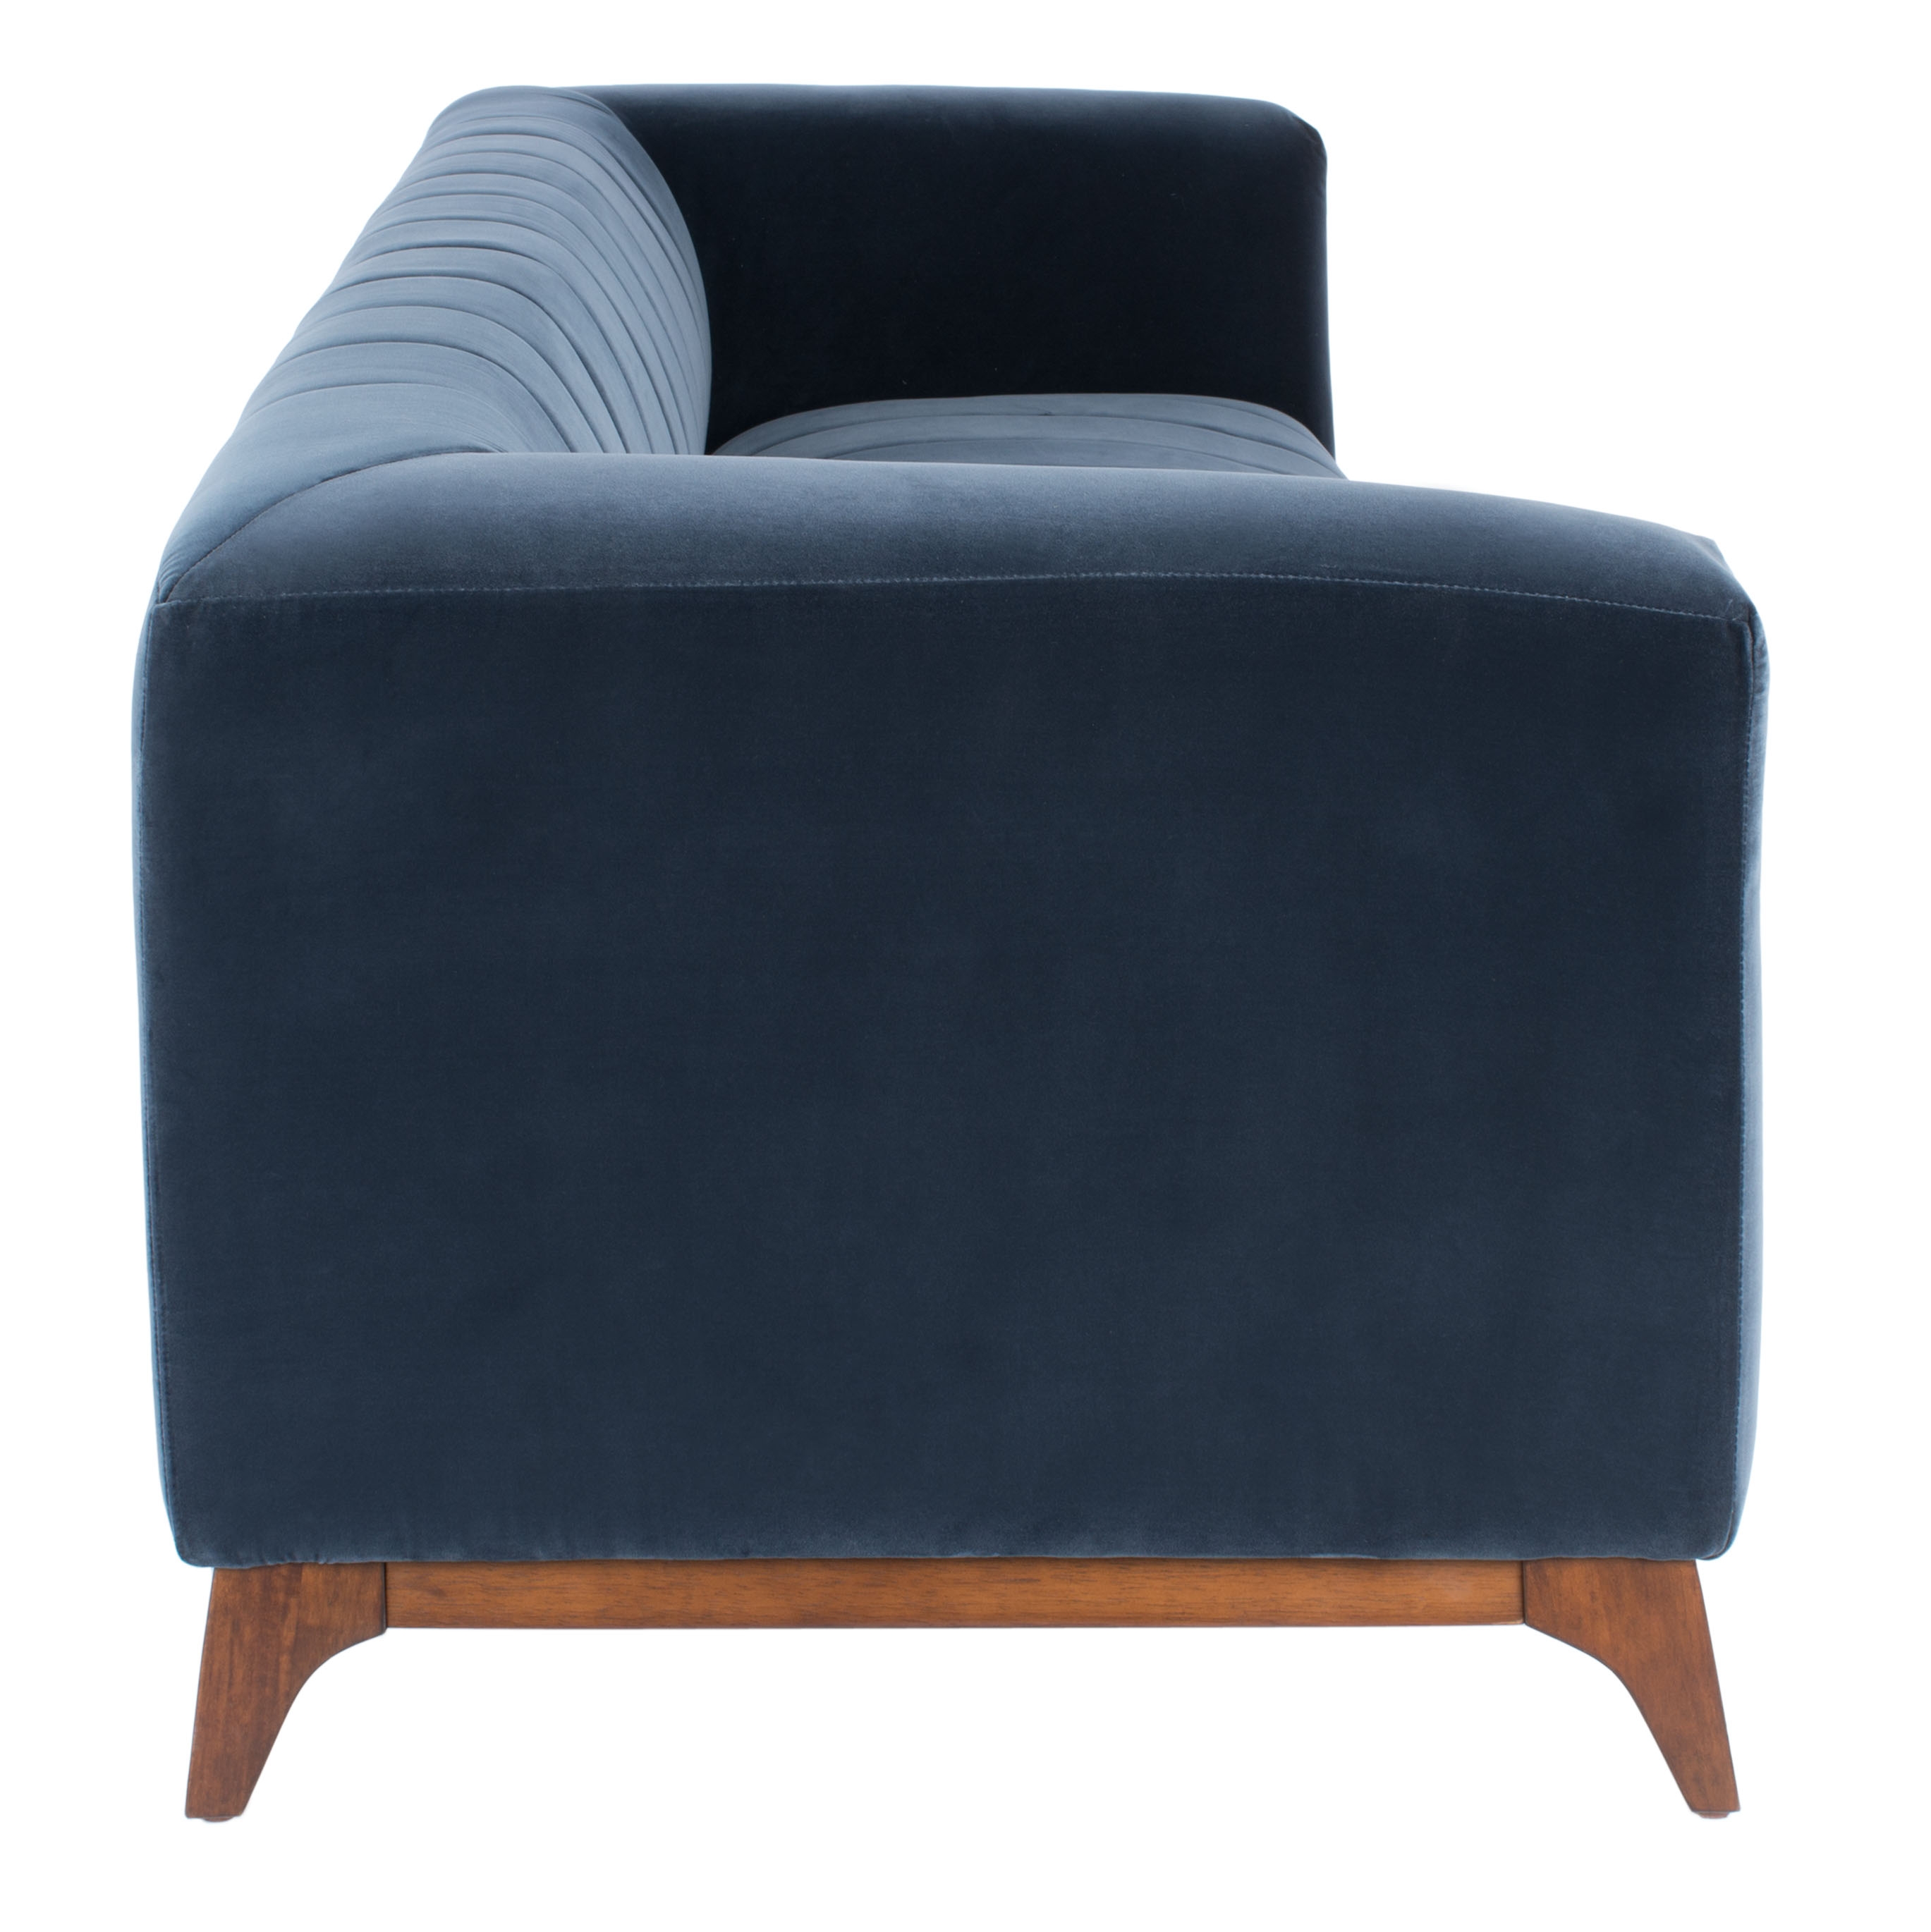 Dixie Channel Tufted Sofa - Navy - Arlo Home - Image 1